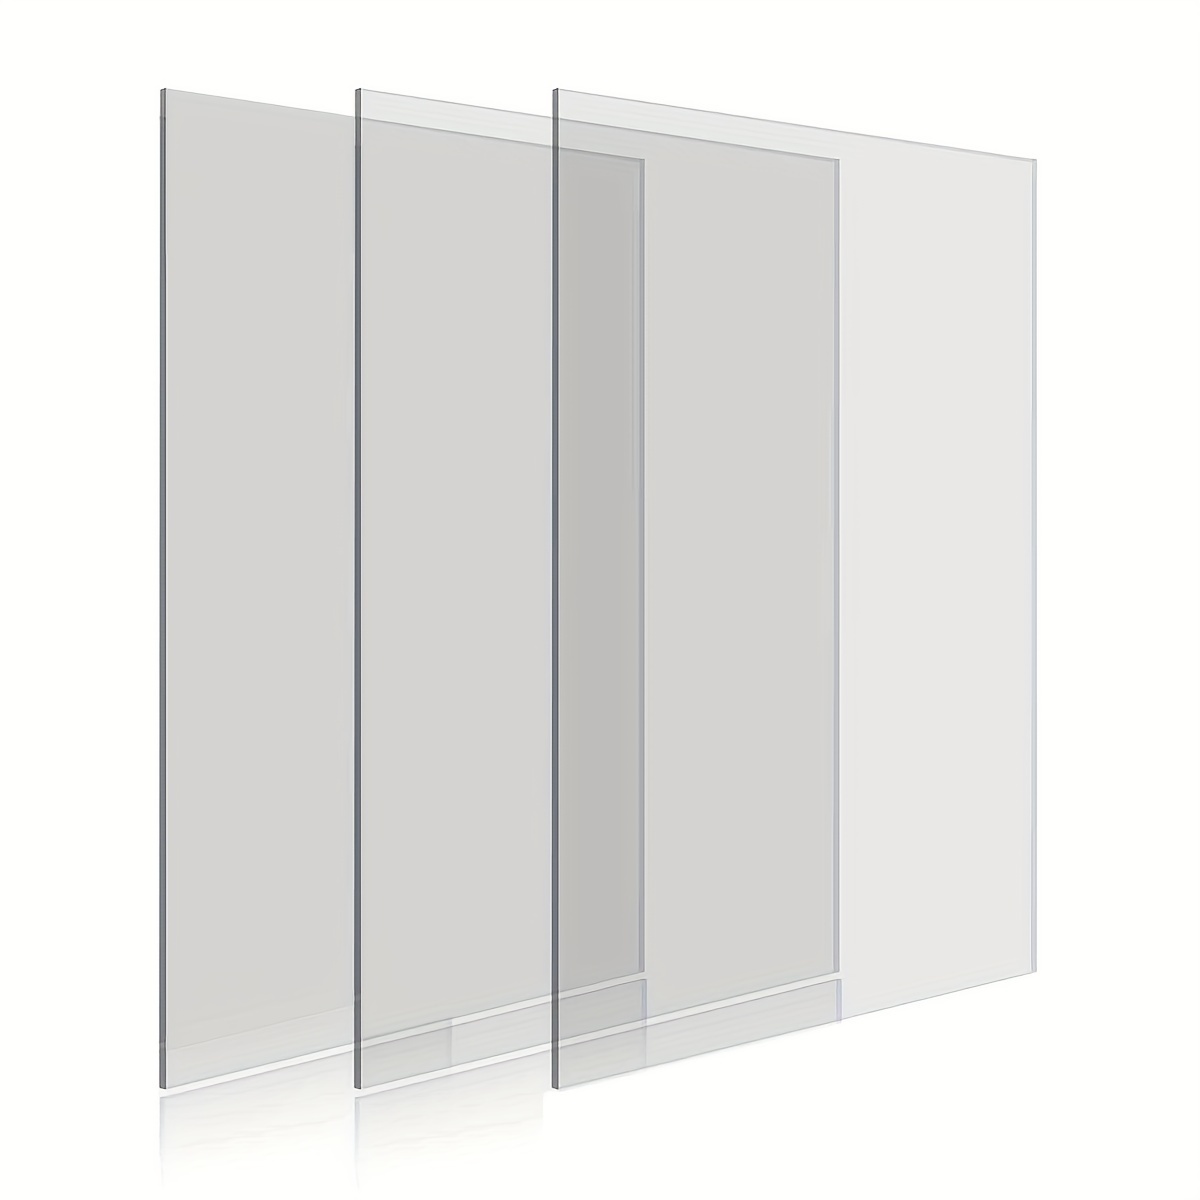 5 pcak Acrylic Sheet Plexiglass Sheet Clear Acrylic Perspex Sheet Plastic  Sheeting, Durable Water Resistant PET Sheet, for Crafting Projects, Picture  Frames, Cricut Cutting and More, 2/5/10/20pcs 